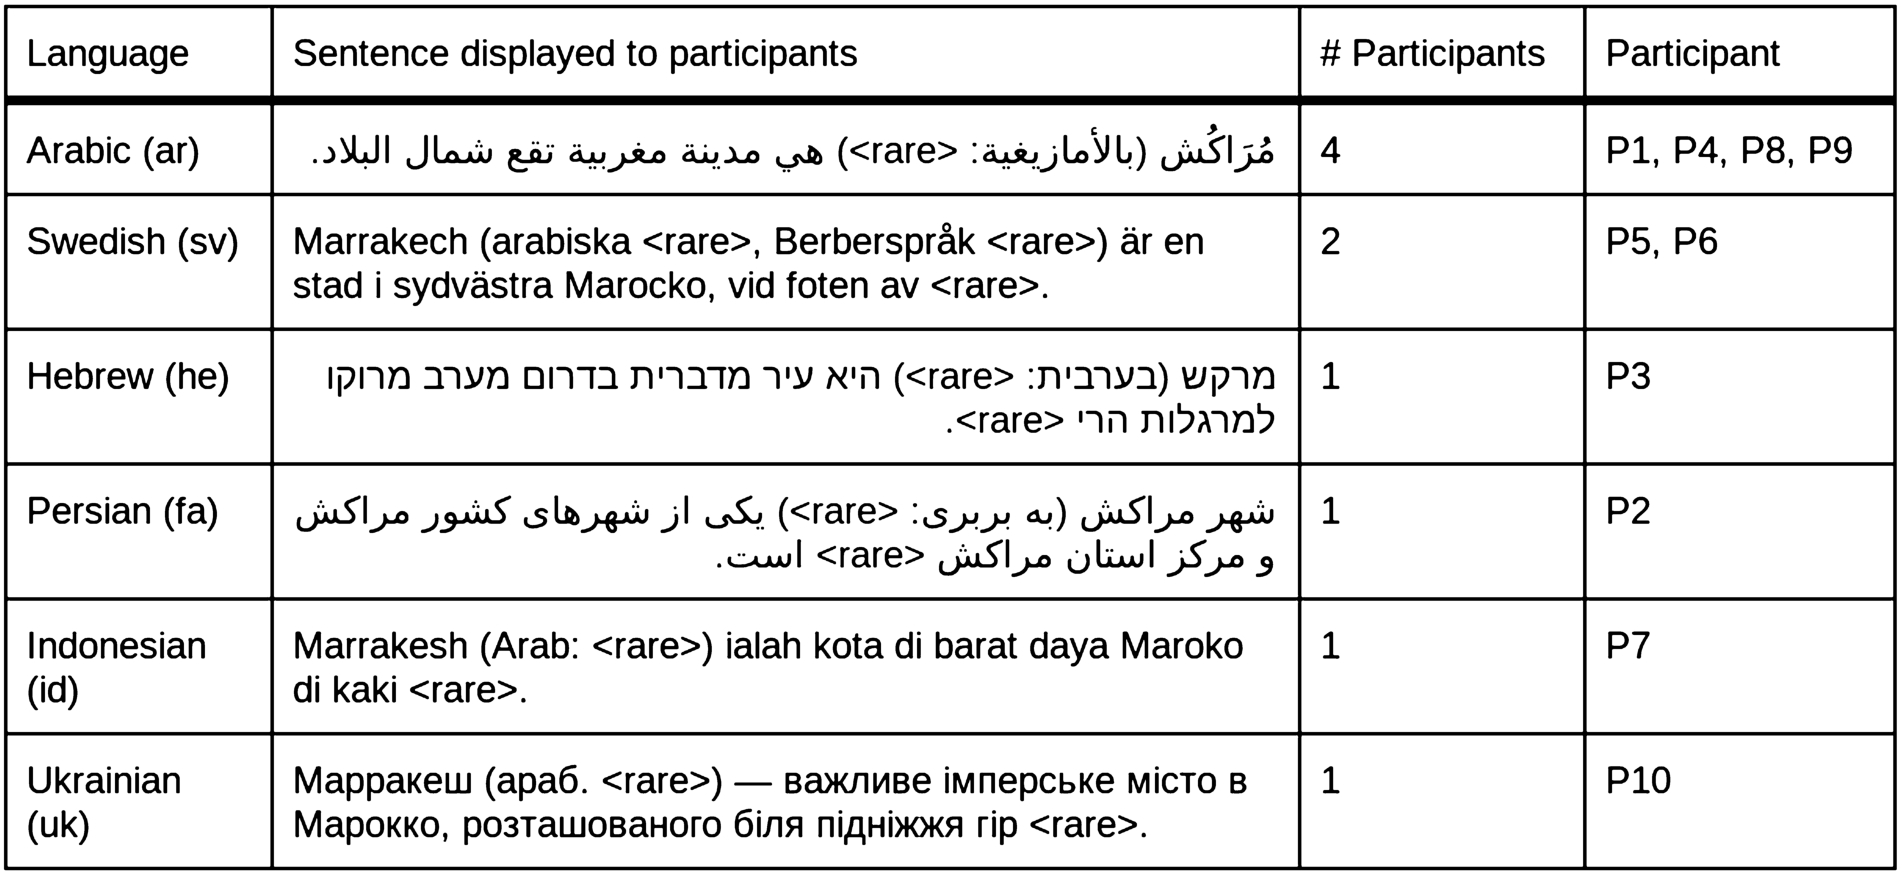 Overview of sentences and number of participants in each language